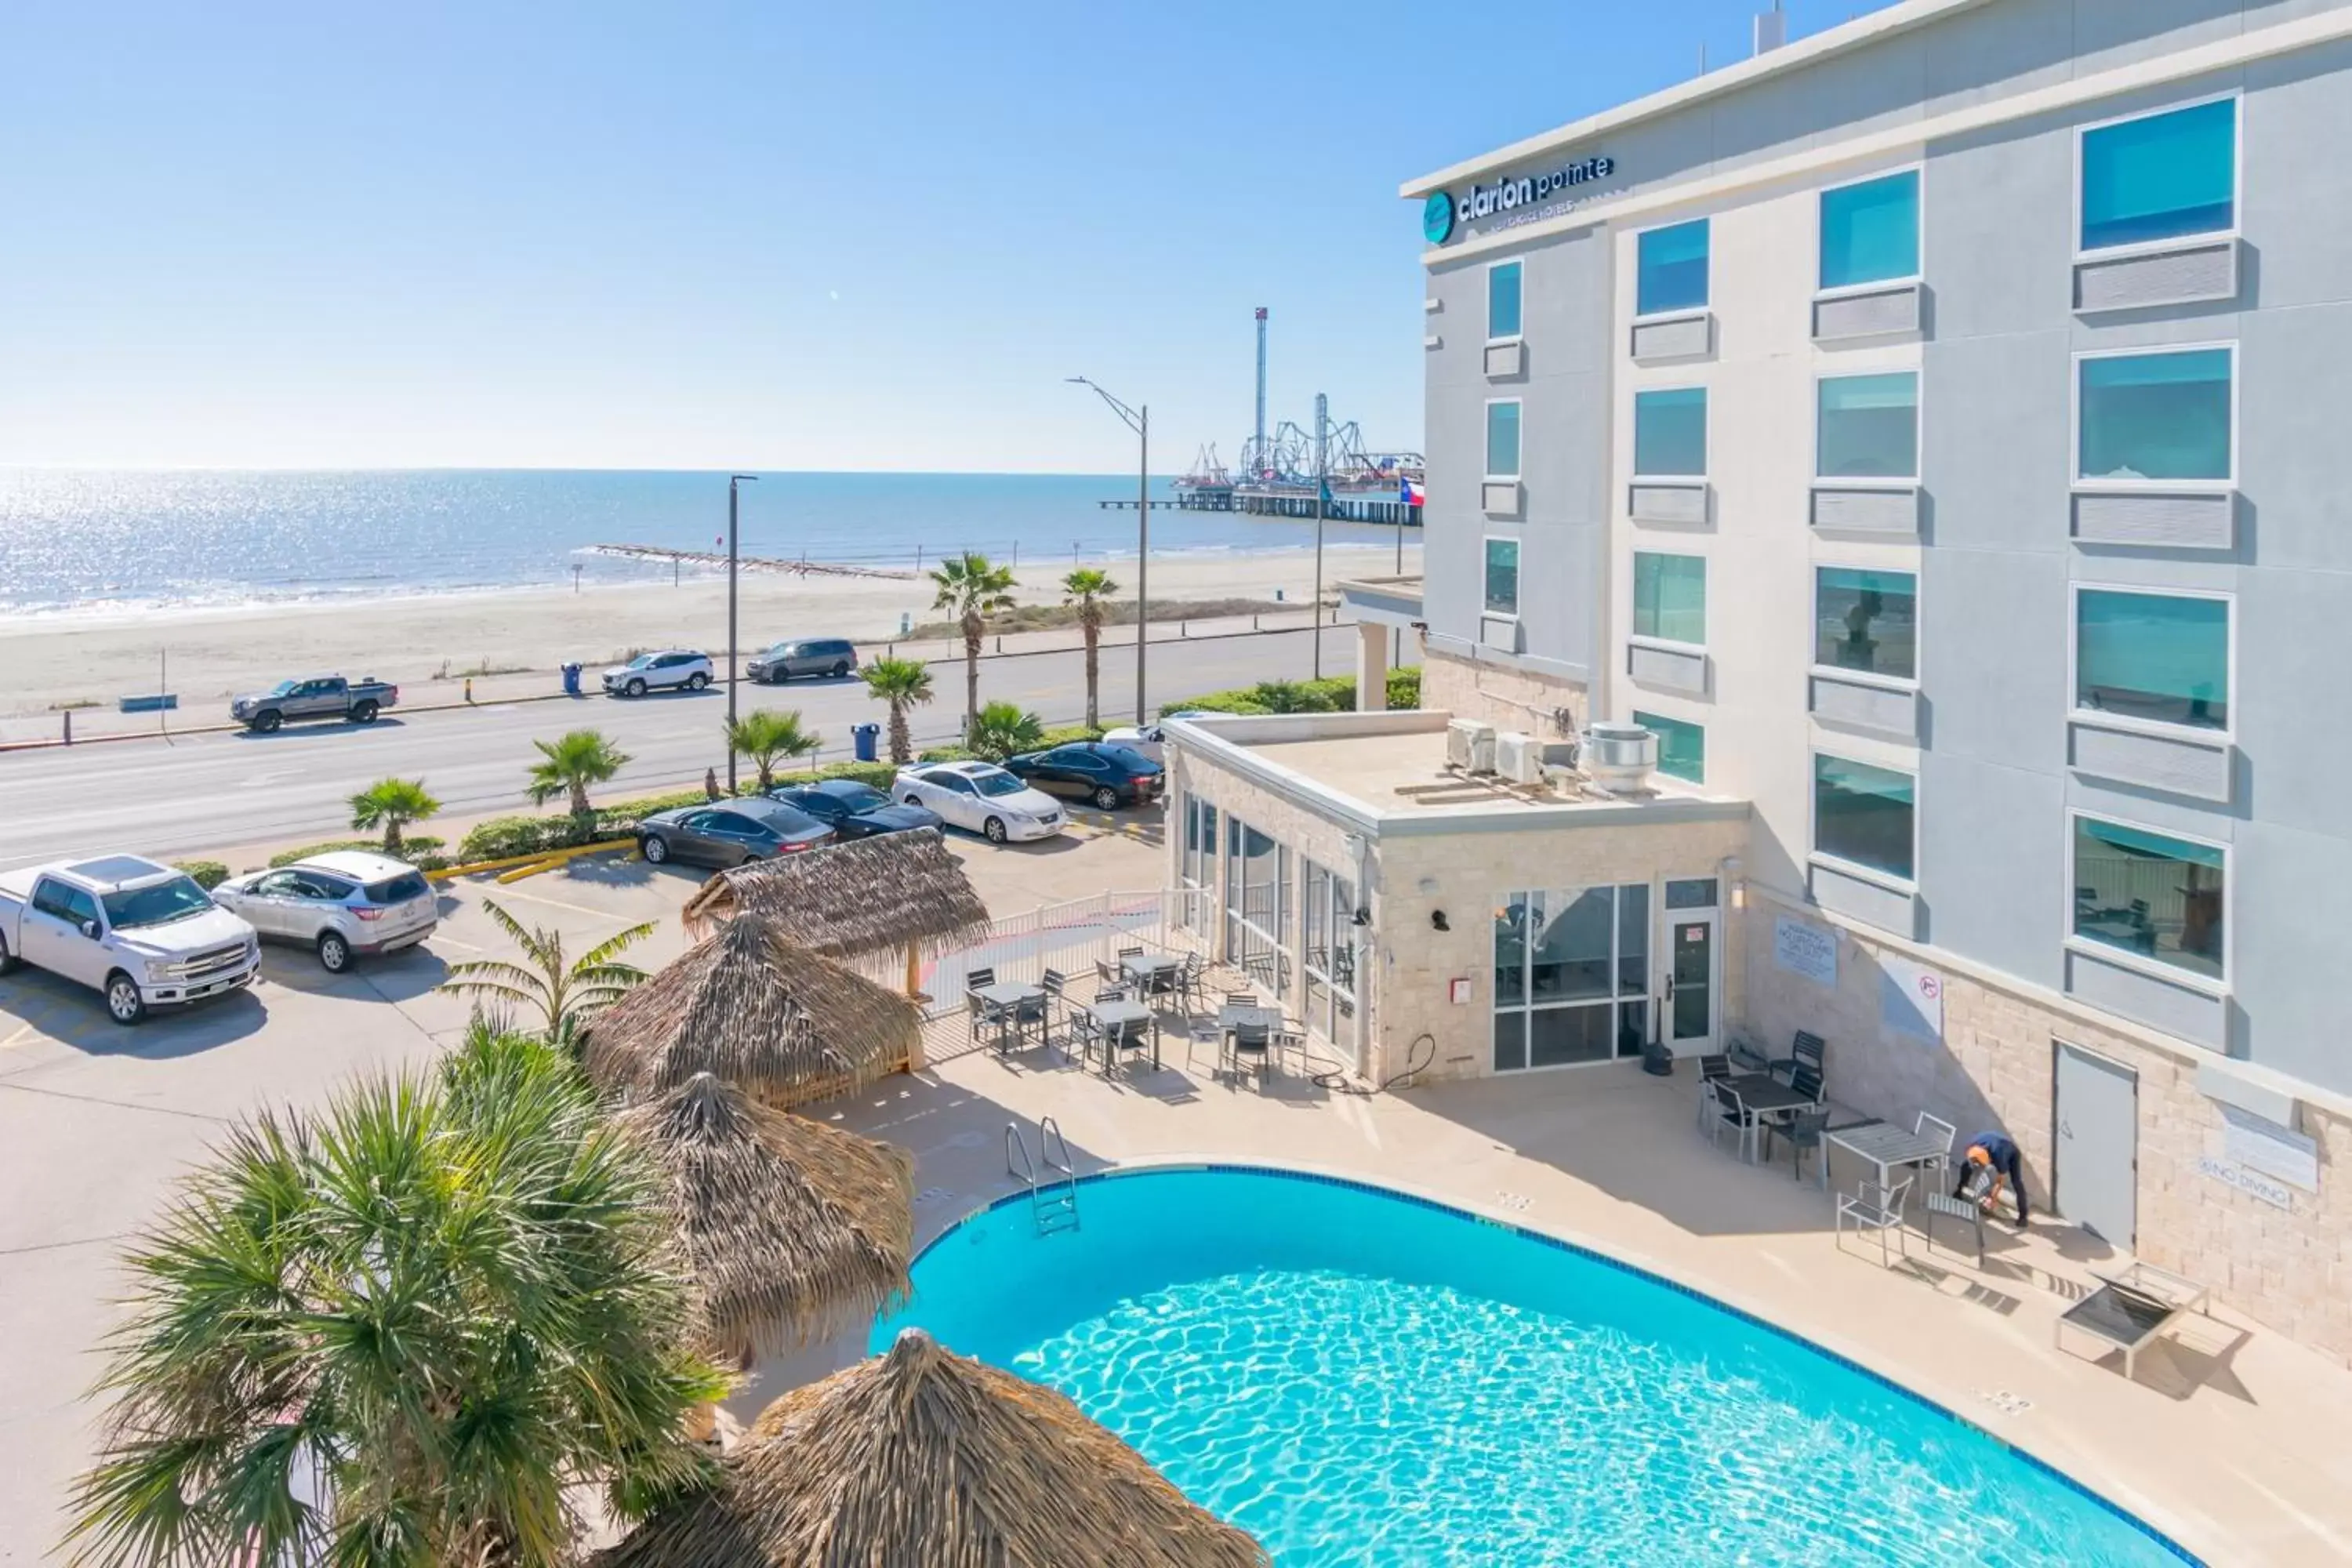 Pool View in Clarion Pointe Galveston Seawall